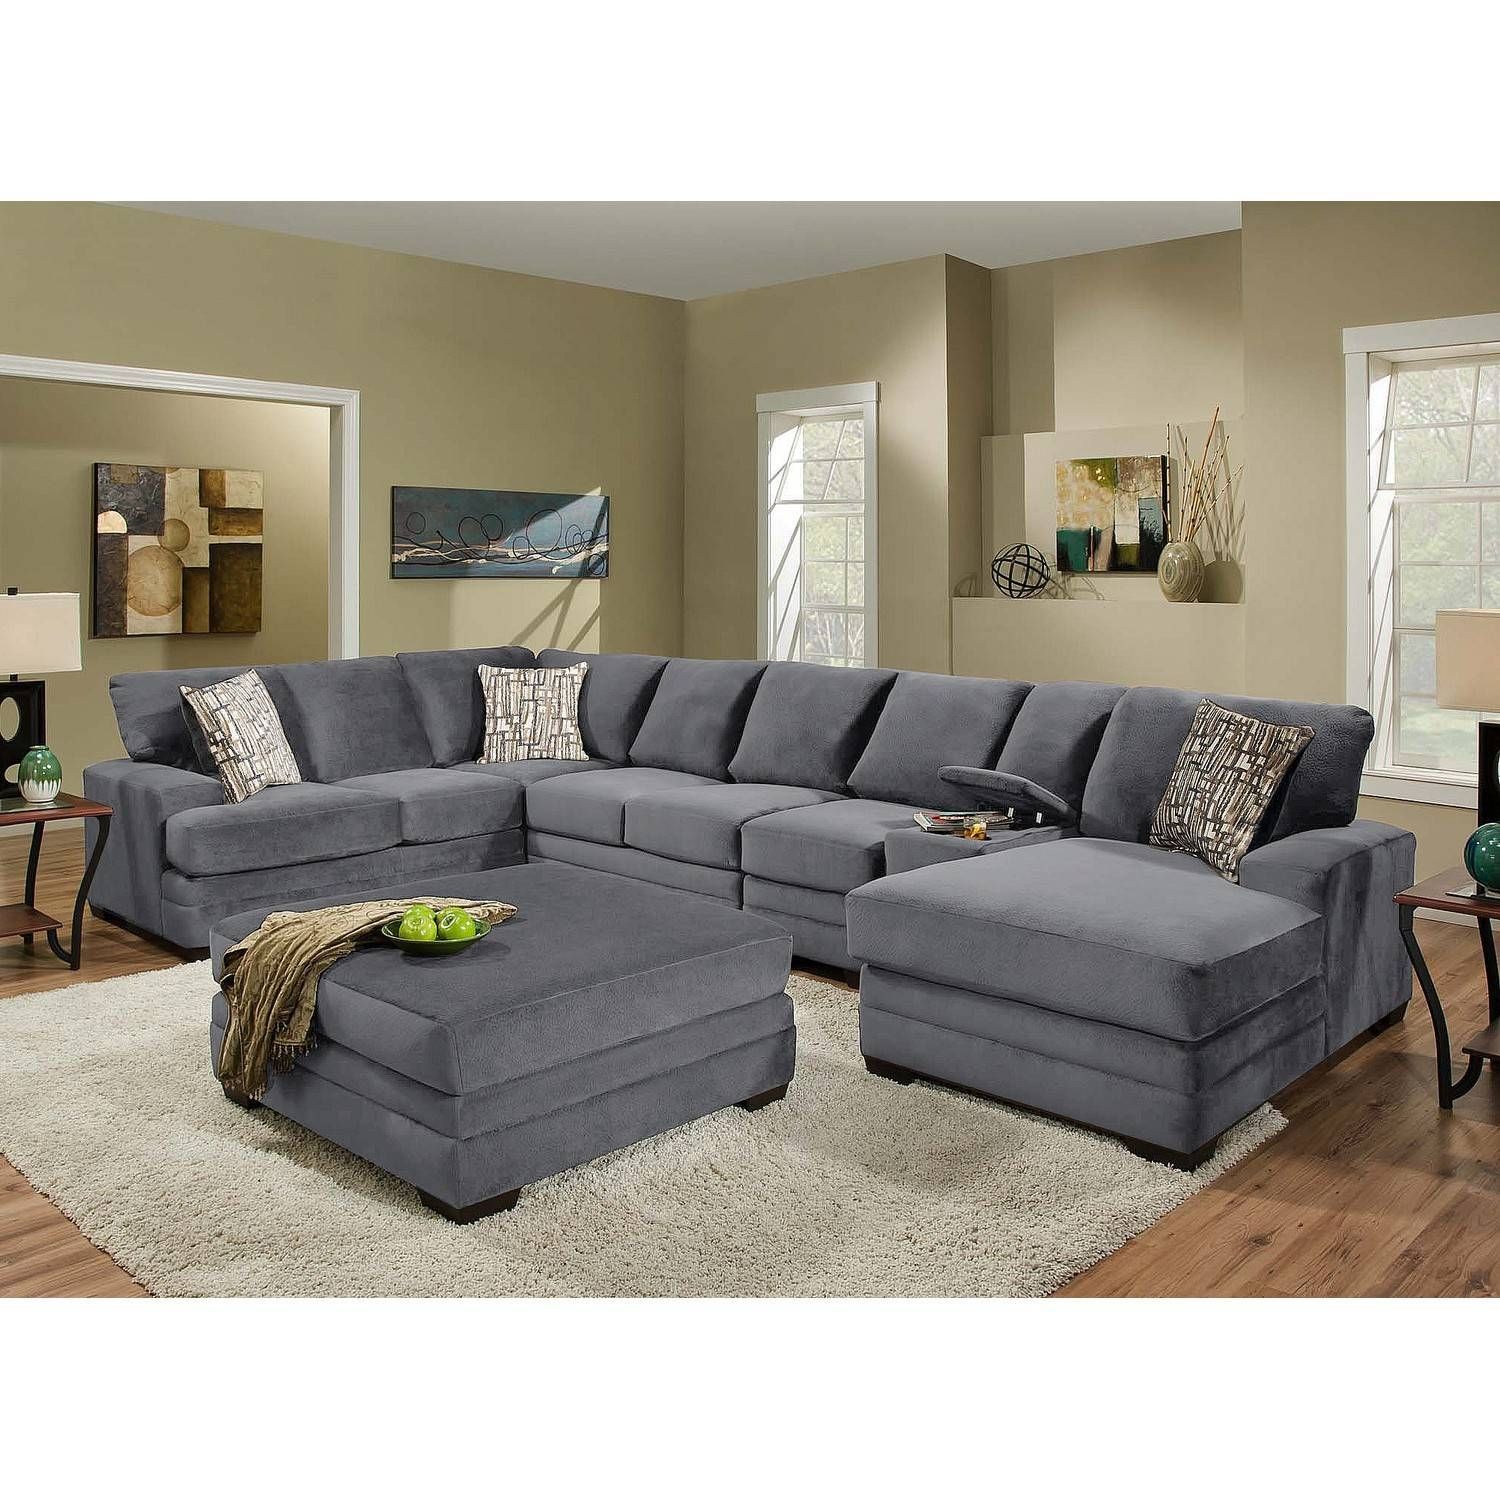 The Best Down Filled Sofas and Sectionals